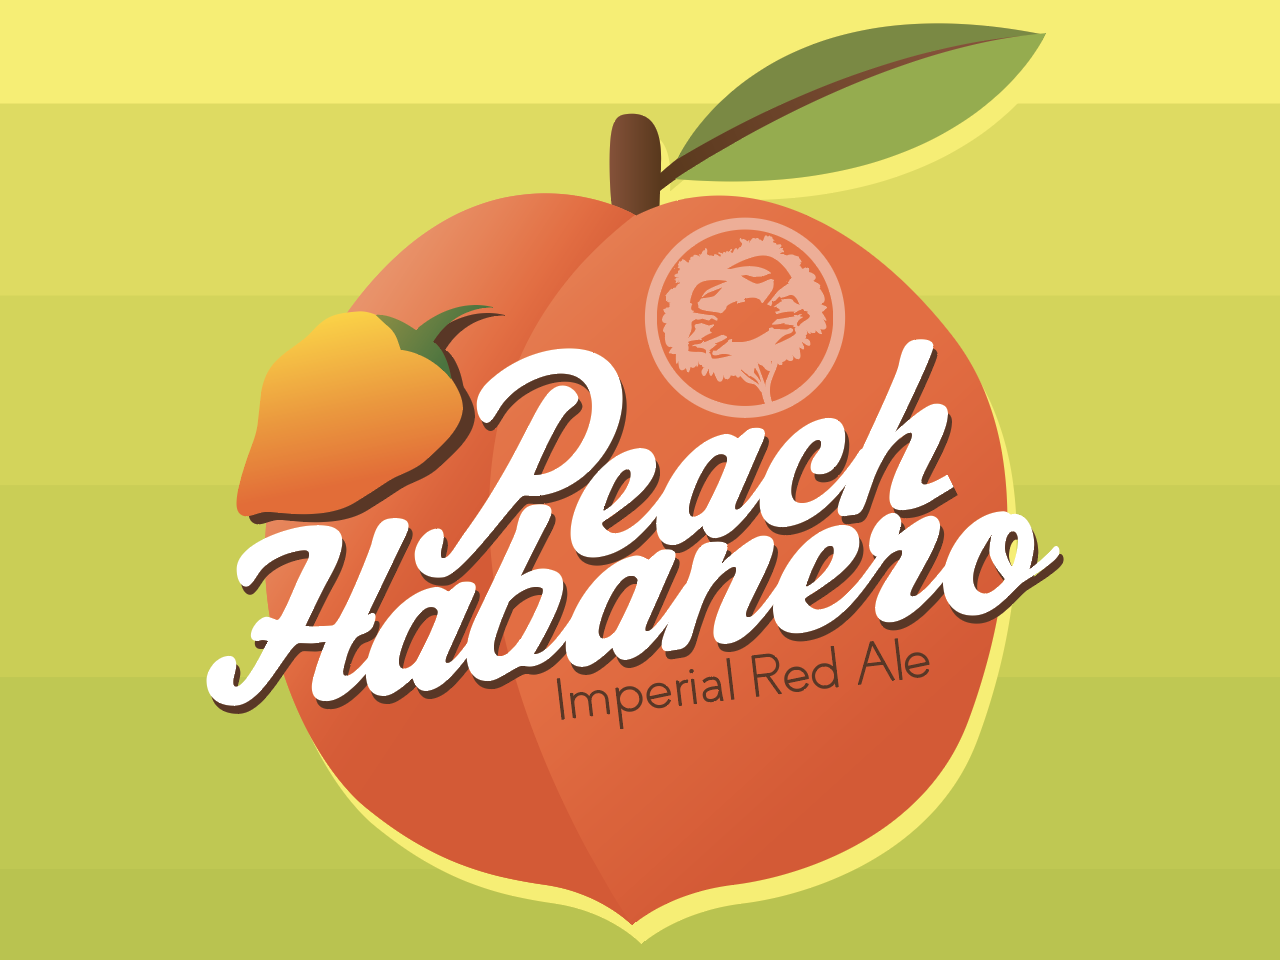 Peach Habanero Beer Label Design For Crabtree Brewing Company By Emily Grace King On Dribbble